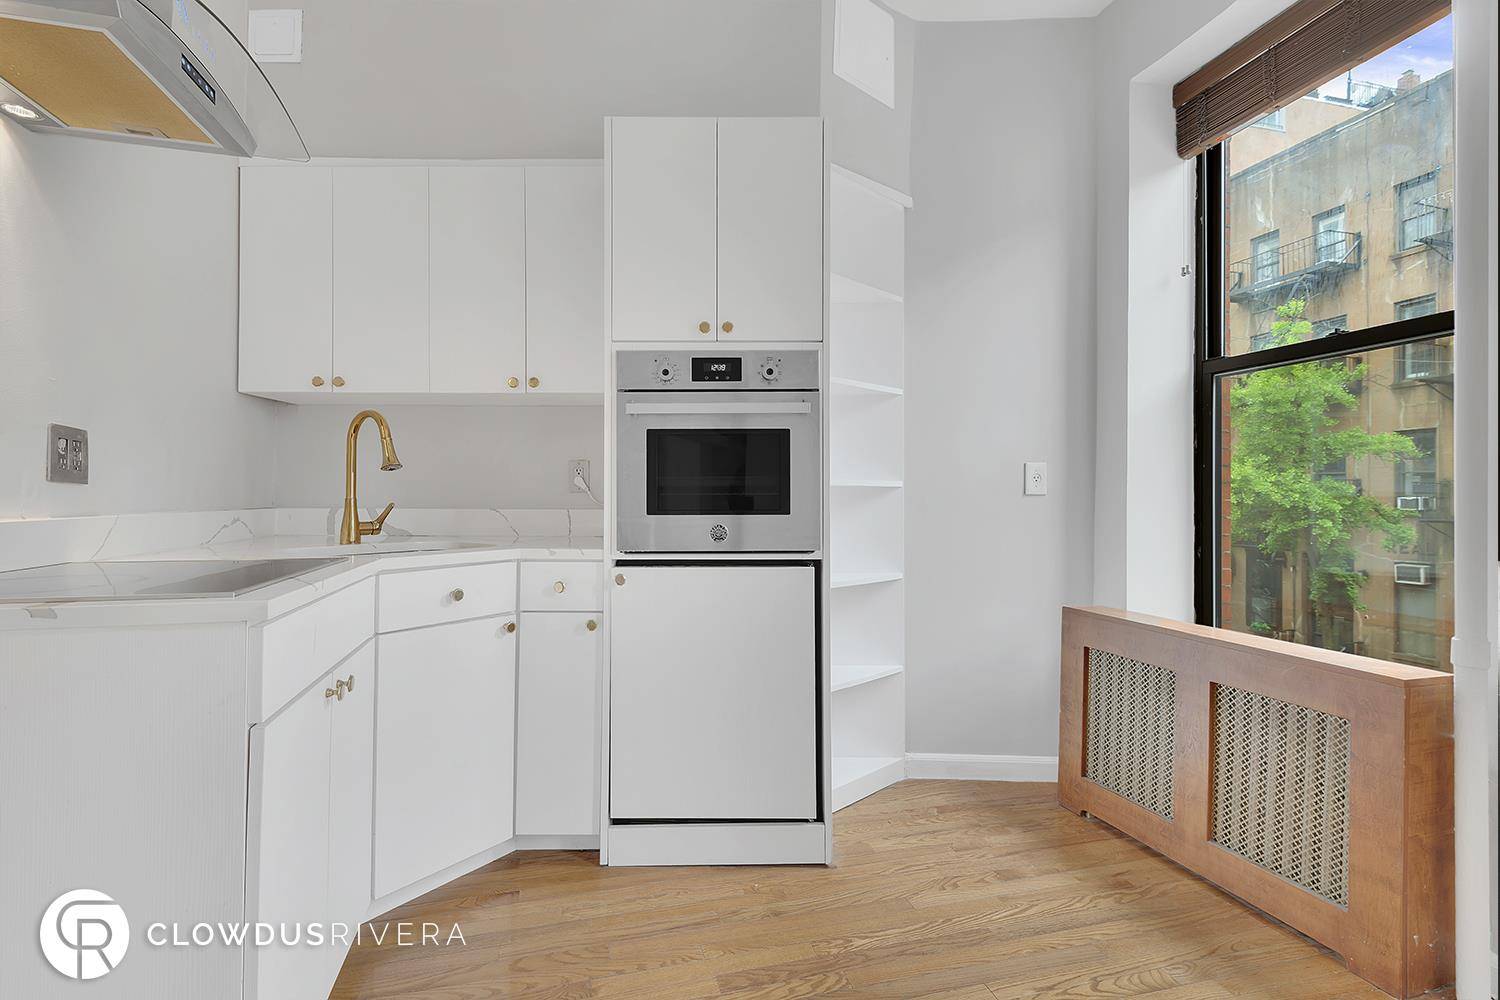 SUNNY, SOUTH FACING ONE BEDROOM HOME IN FANTASTIC LOCATION375 West 46th Street, Apt 2EElectricity, Cable, WiFi, Heat and Hot Water ARE INCLUDED IN RENTYOUR HOMEWelcome home to this gorgeous, sunny ...